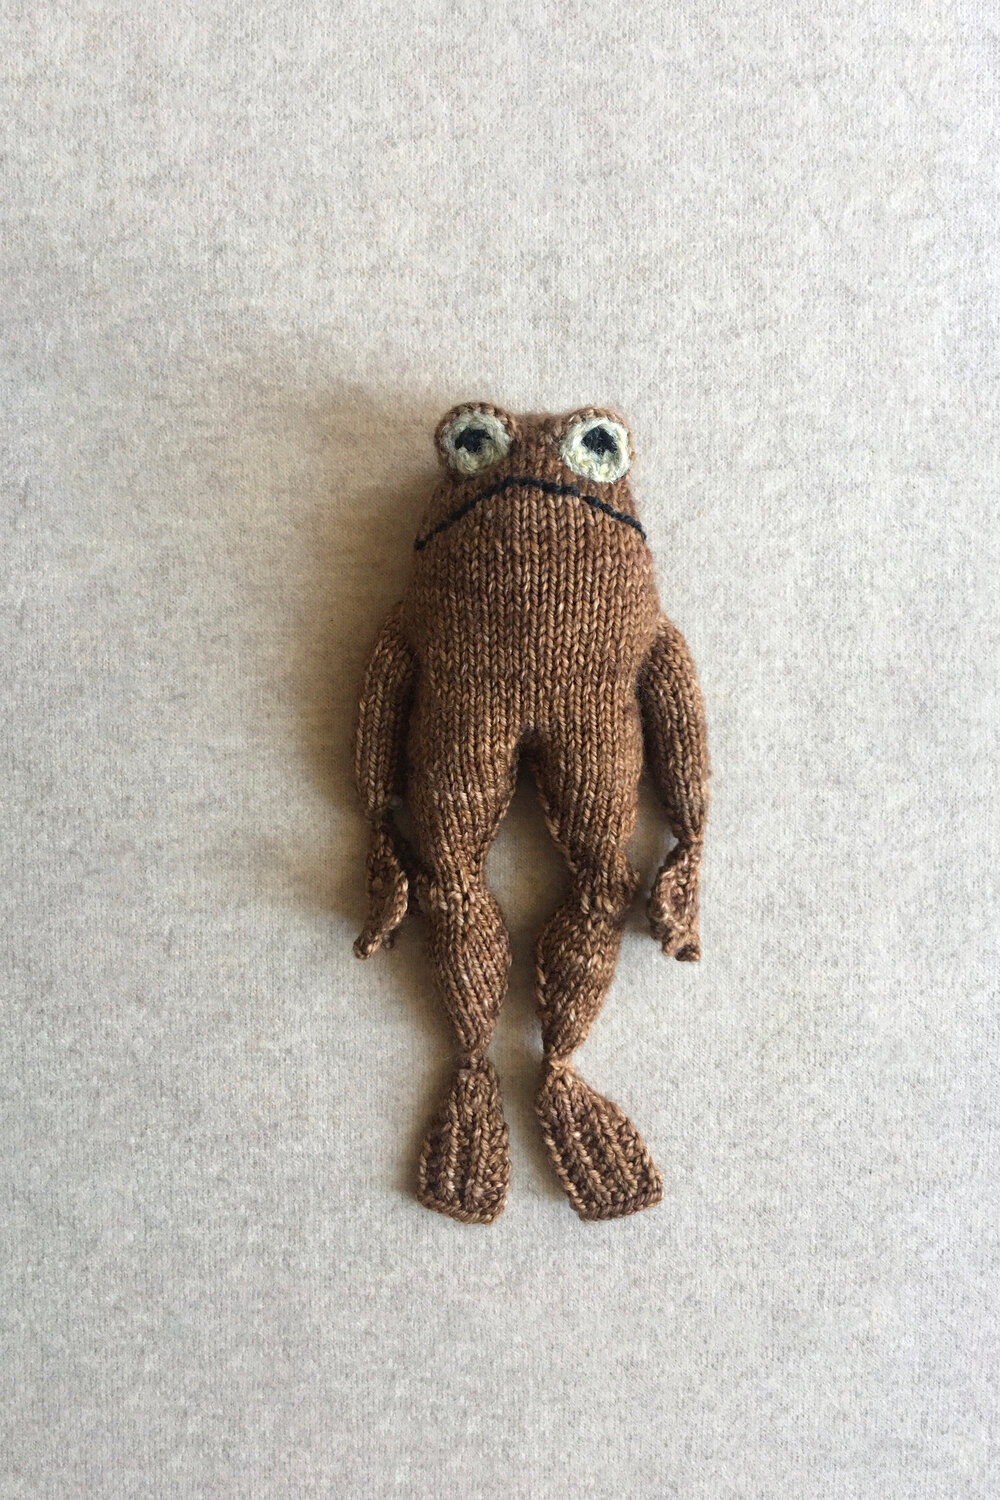 Frog and toad natural wool miniature toad Needle felted frog wool felt frog sculpture toad green felt frog tiny figurine